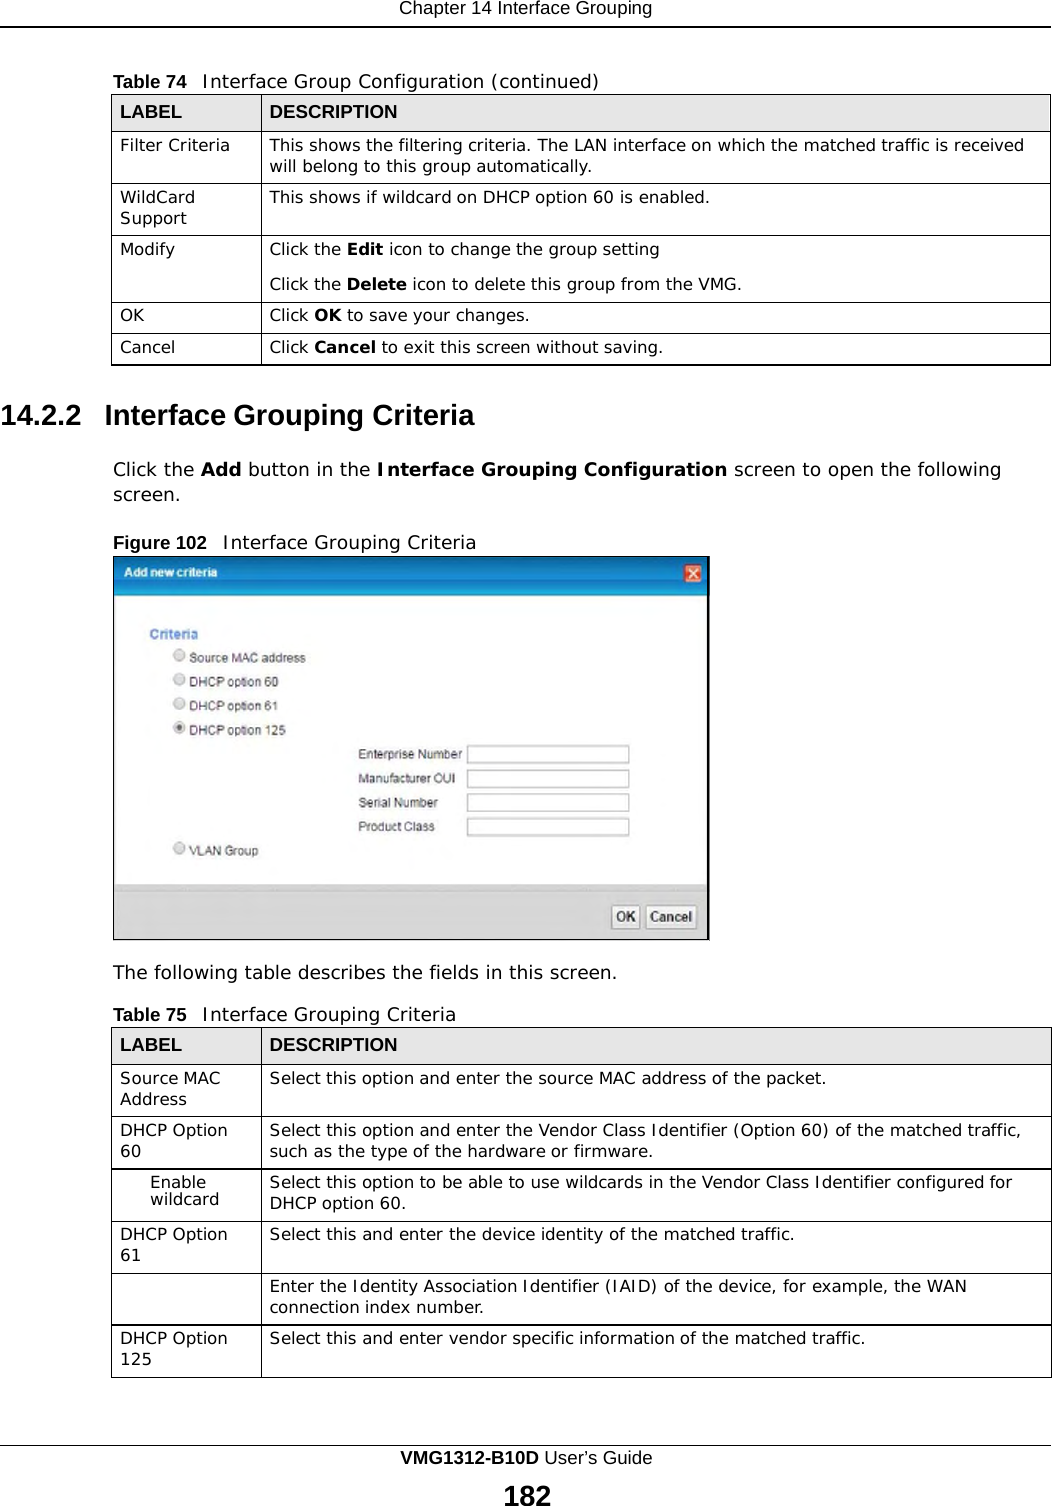 Chapter 14 Interface Grouping      Table 74   Interface Group Configuration (continued)  LABEL DESCRIPTION Filter Criteria This shows the filtering criteria. The LAN interface on which the matched traffic is received will belong to this group automatically. WildCard Support This shows if wildcard on DHCP option 60 is enabled. Modify Click the Edit icon to change the group setting  Click the Delete icon to delete this group from the VMG. OK Click OK to save your changes. Cancel Click Cancel to exit this screen without saving.  14.2.2 Interface Grouping Criteria  Click the Add button in the Interface Grouping Configuration screen to open the following screen.  Figure 102   Interface Grouping Criteria                     The following table describes the fields in this screen.  Table 75   Interface Grouping Criteria  LABEL DESCRIPTION Source MAC Address Select this option and enter the source MAC address of the packet. DHCP Option 60 Select this option and enter the Vendor Class Identifier (Option 60) of the matched traffic, such as the type of the hardware or firmware. Enable wildcard Select this option to be able to use wildcards in the Vendor Class Identifier configured for DHCP option 60. DHCP Option 61 Select this and enter the device identity of the matched traffic.  Enter the Identity Association Identifier (IAID) of the device, for example, the WAN connection index number. DHCP Option 125 Select this and enter vendor specific information of the matched traffic. VMG1312-B10D User’s Guide 182  